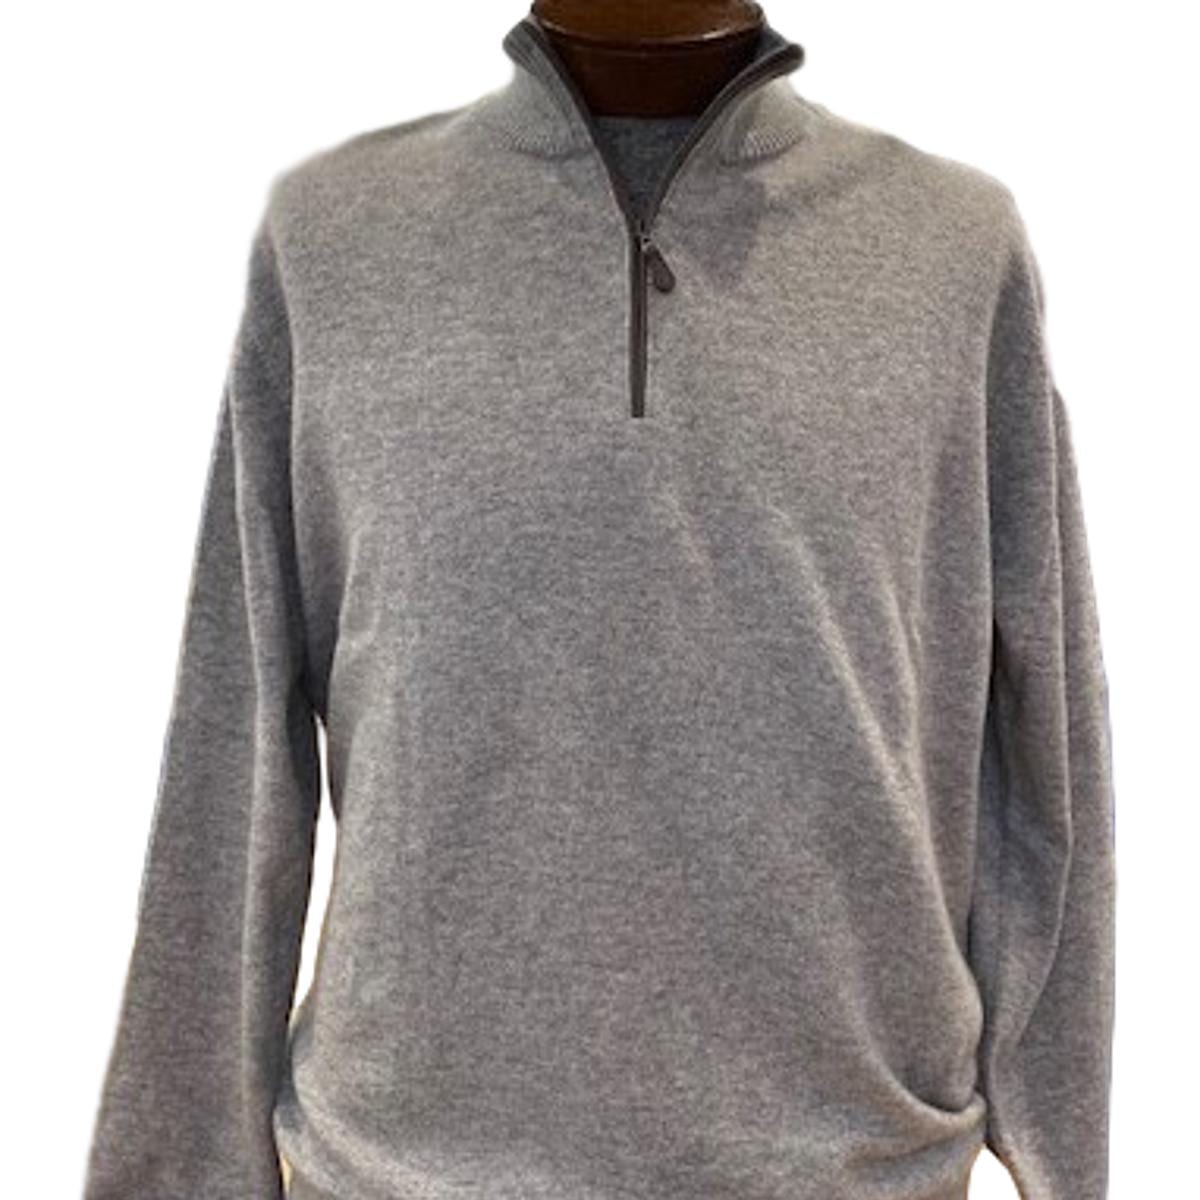 Luxurious Cashmere 1/4 Zip Sweater - Family Britches